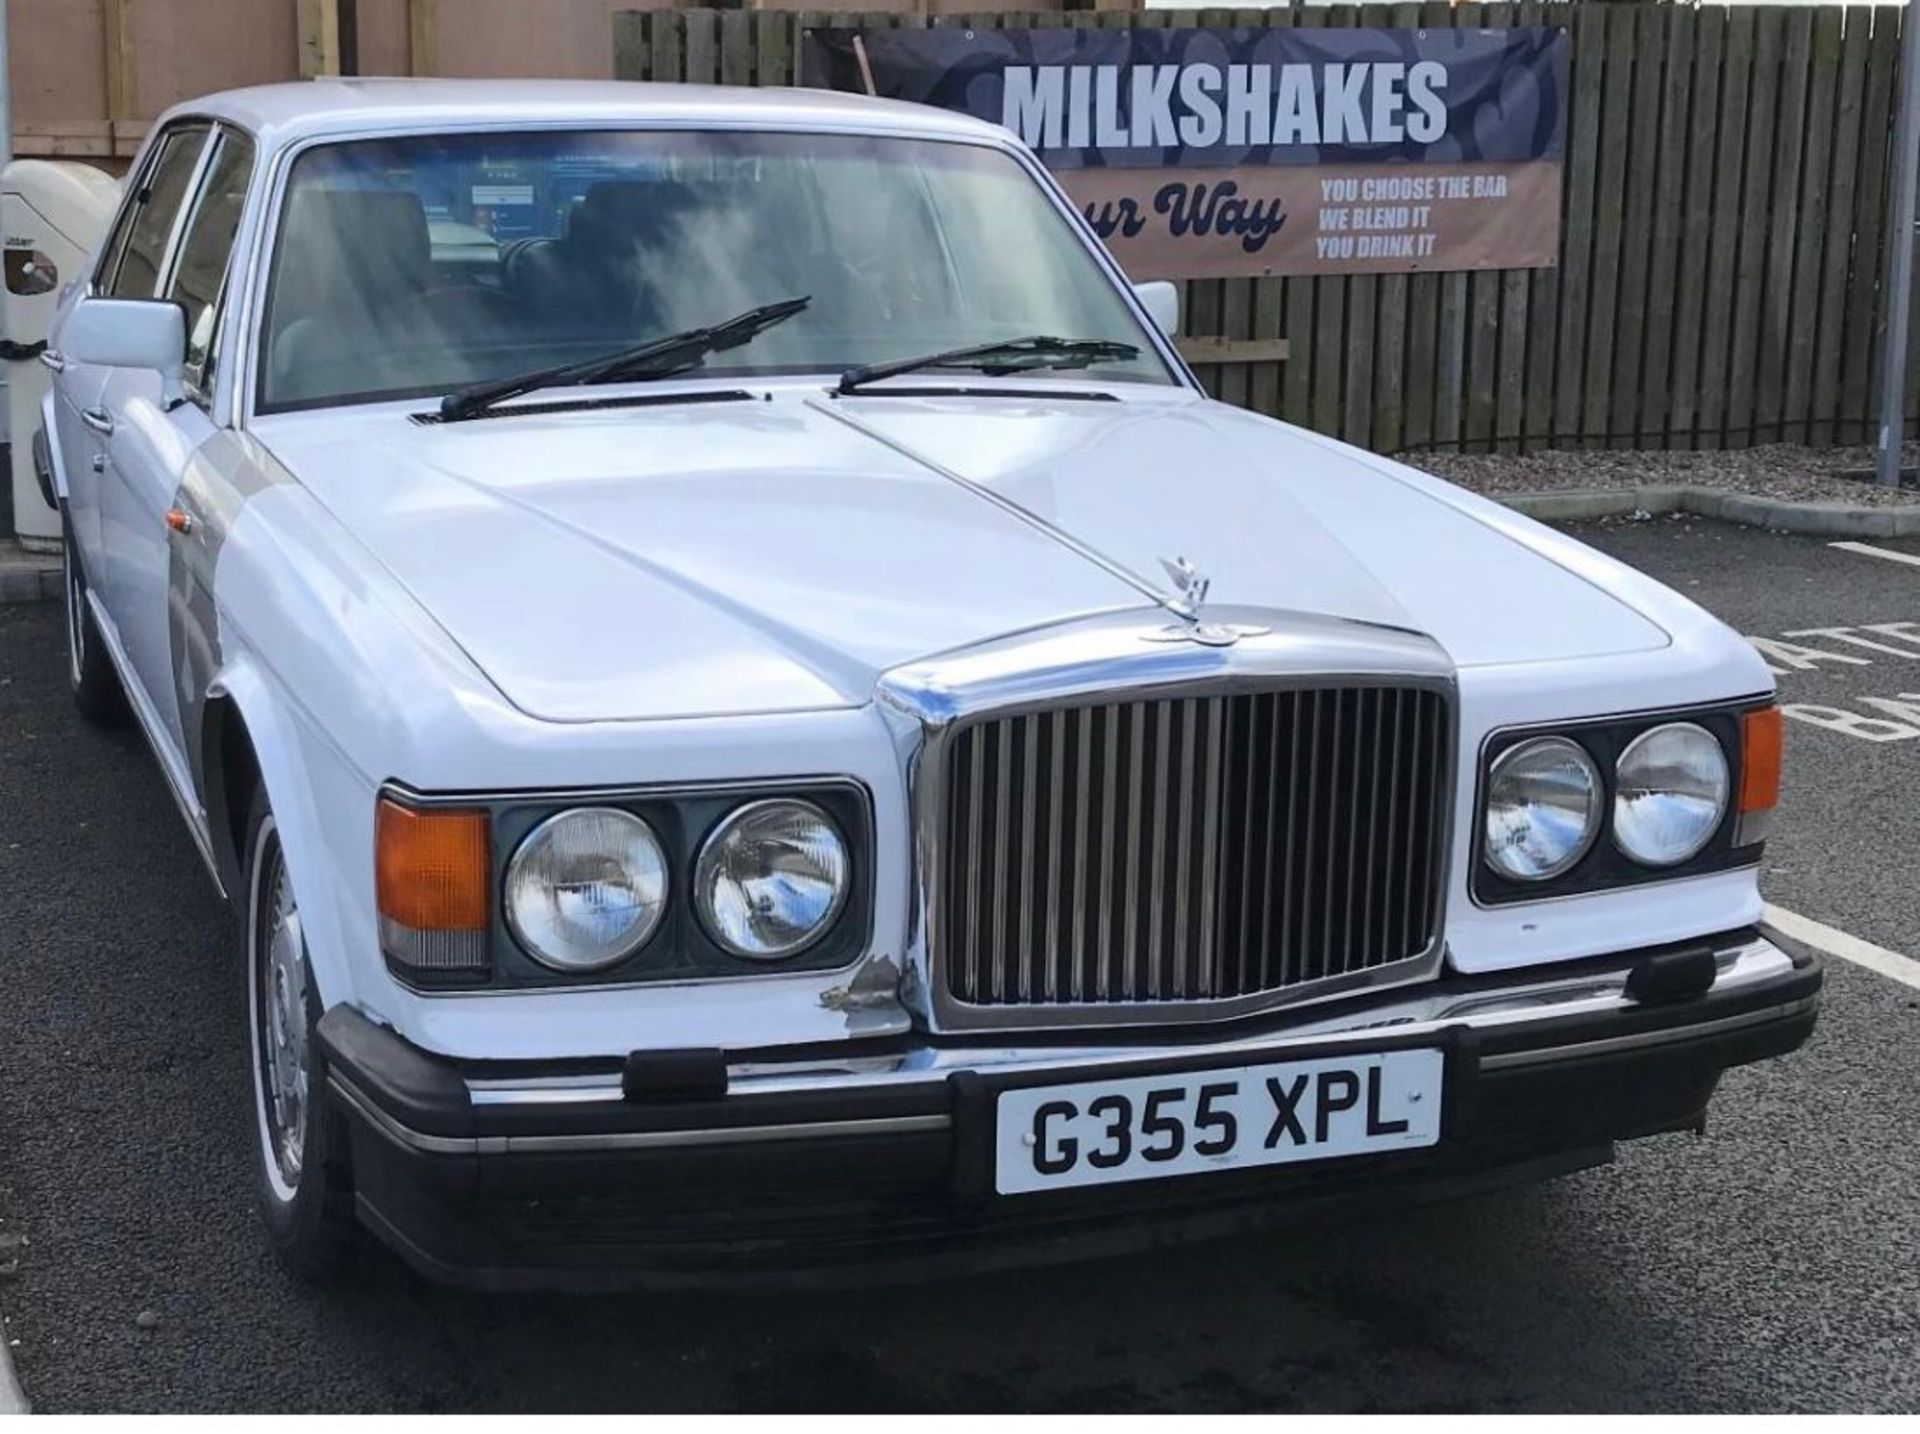 1990 Bentley Mulsanne S - Entry level motoring at a low estimate